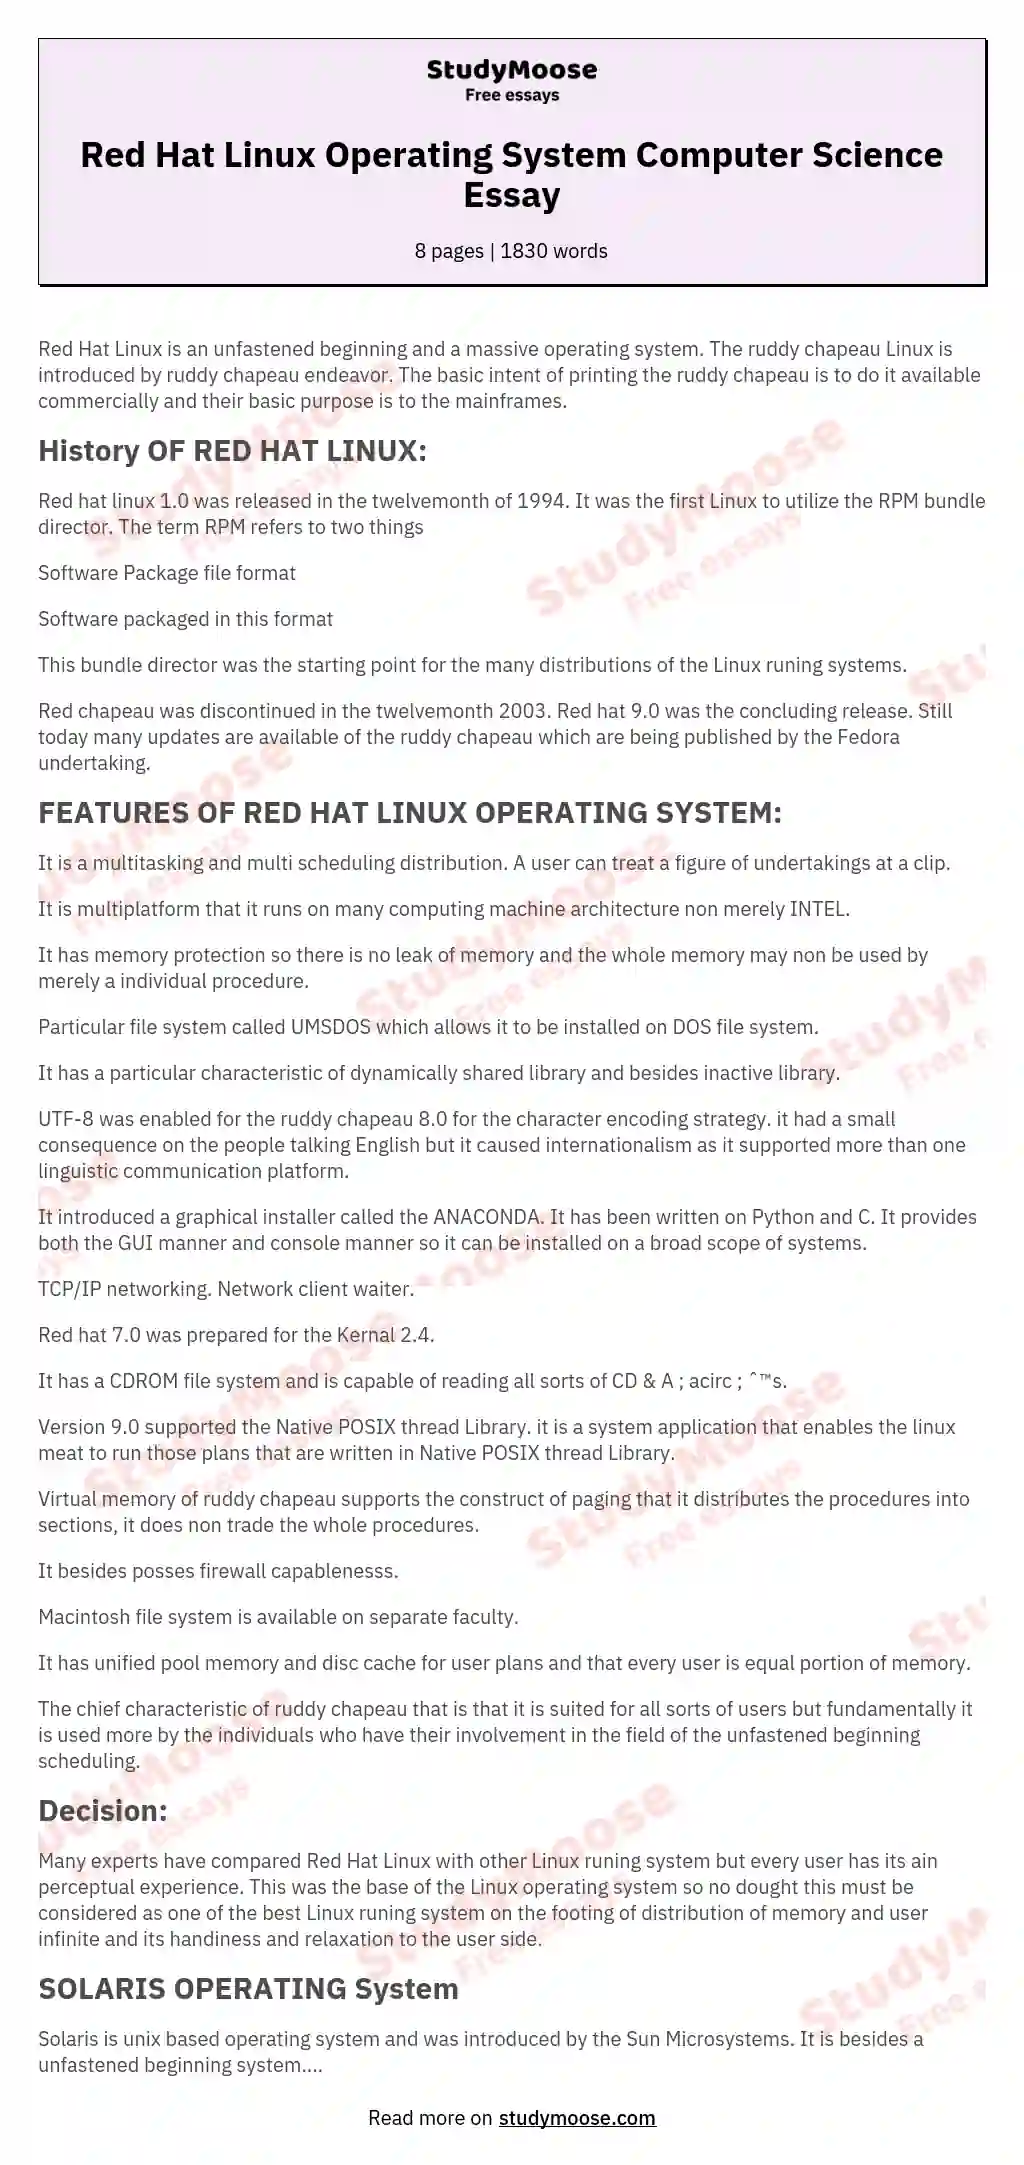 Red Hat Linux Operating System Computer Science Essay essay